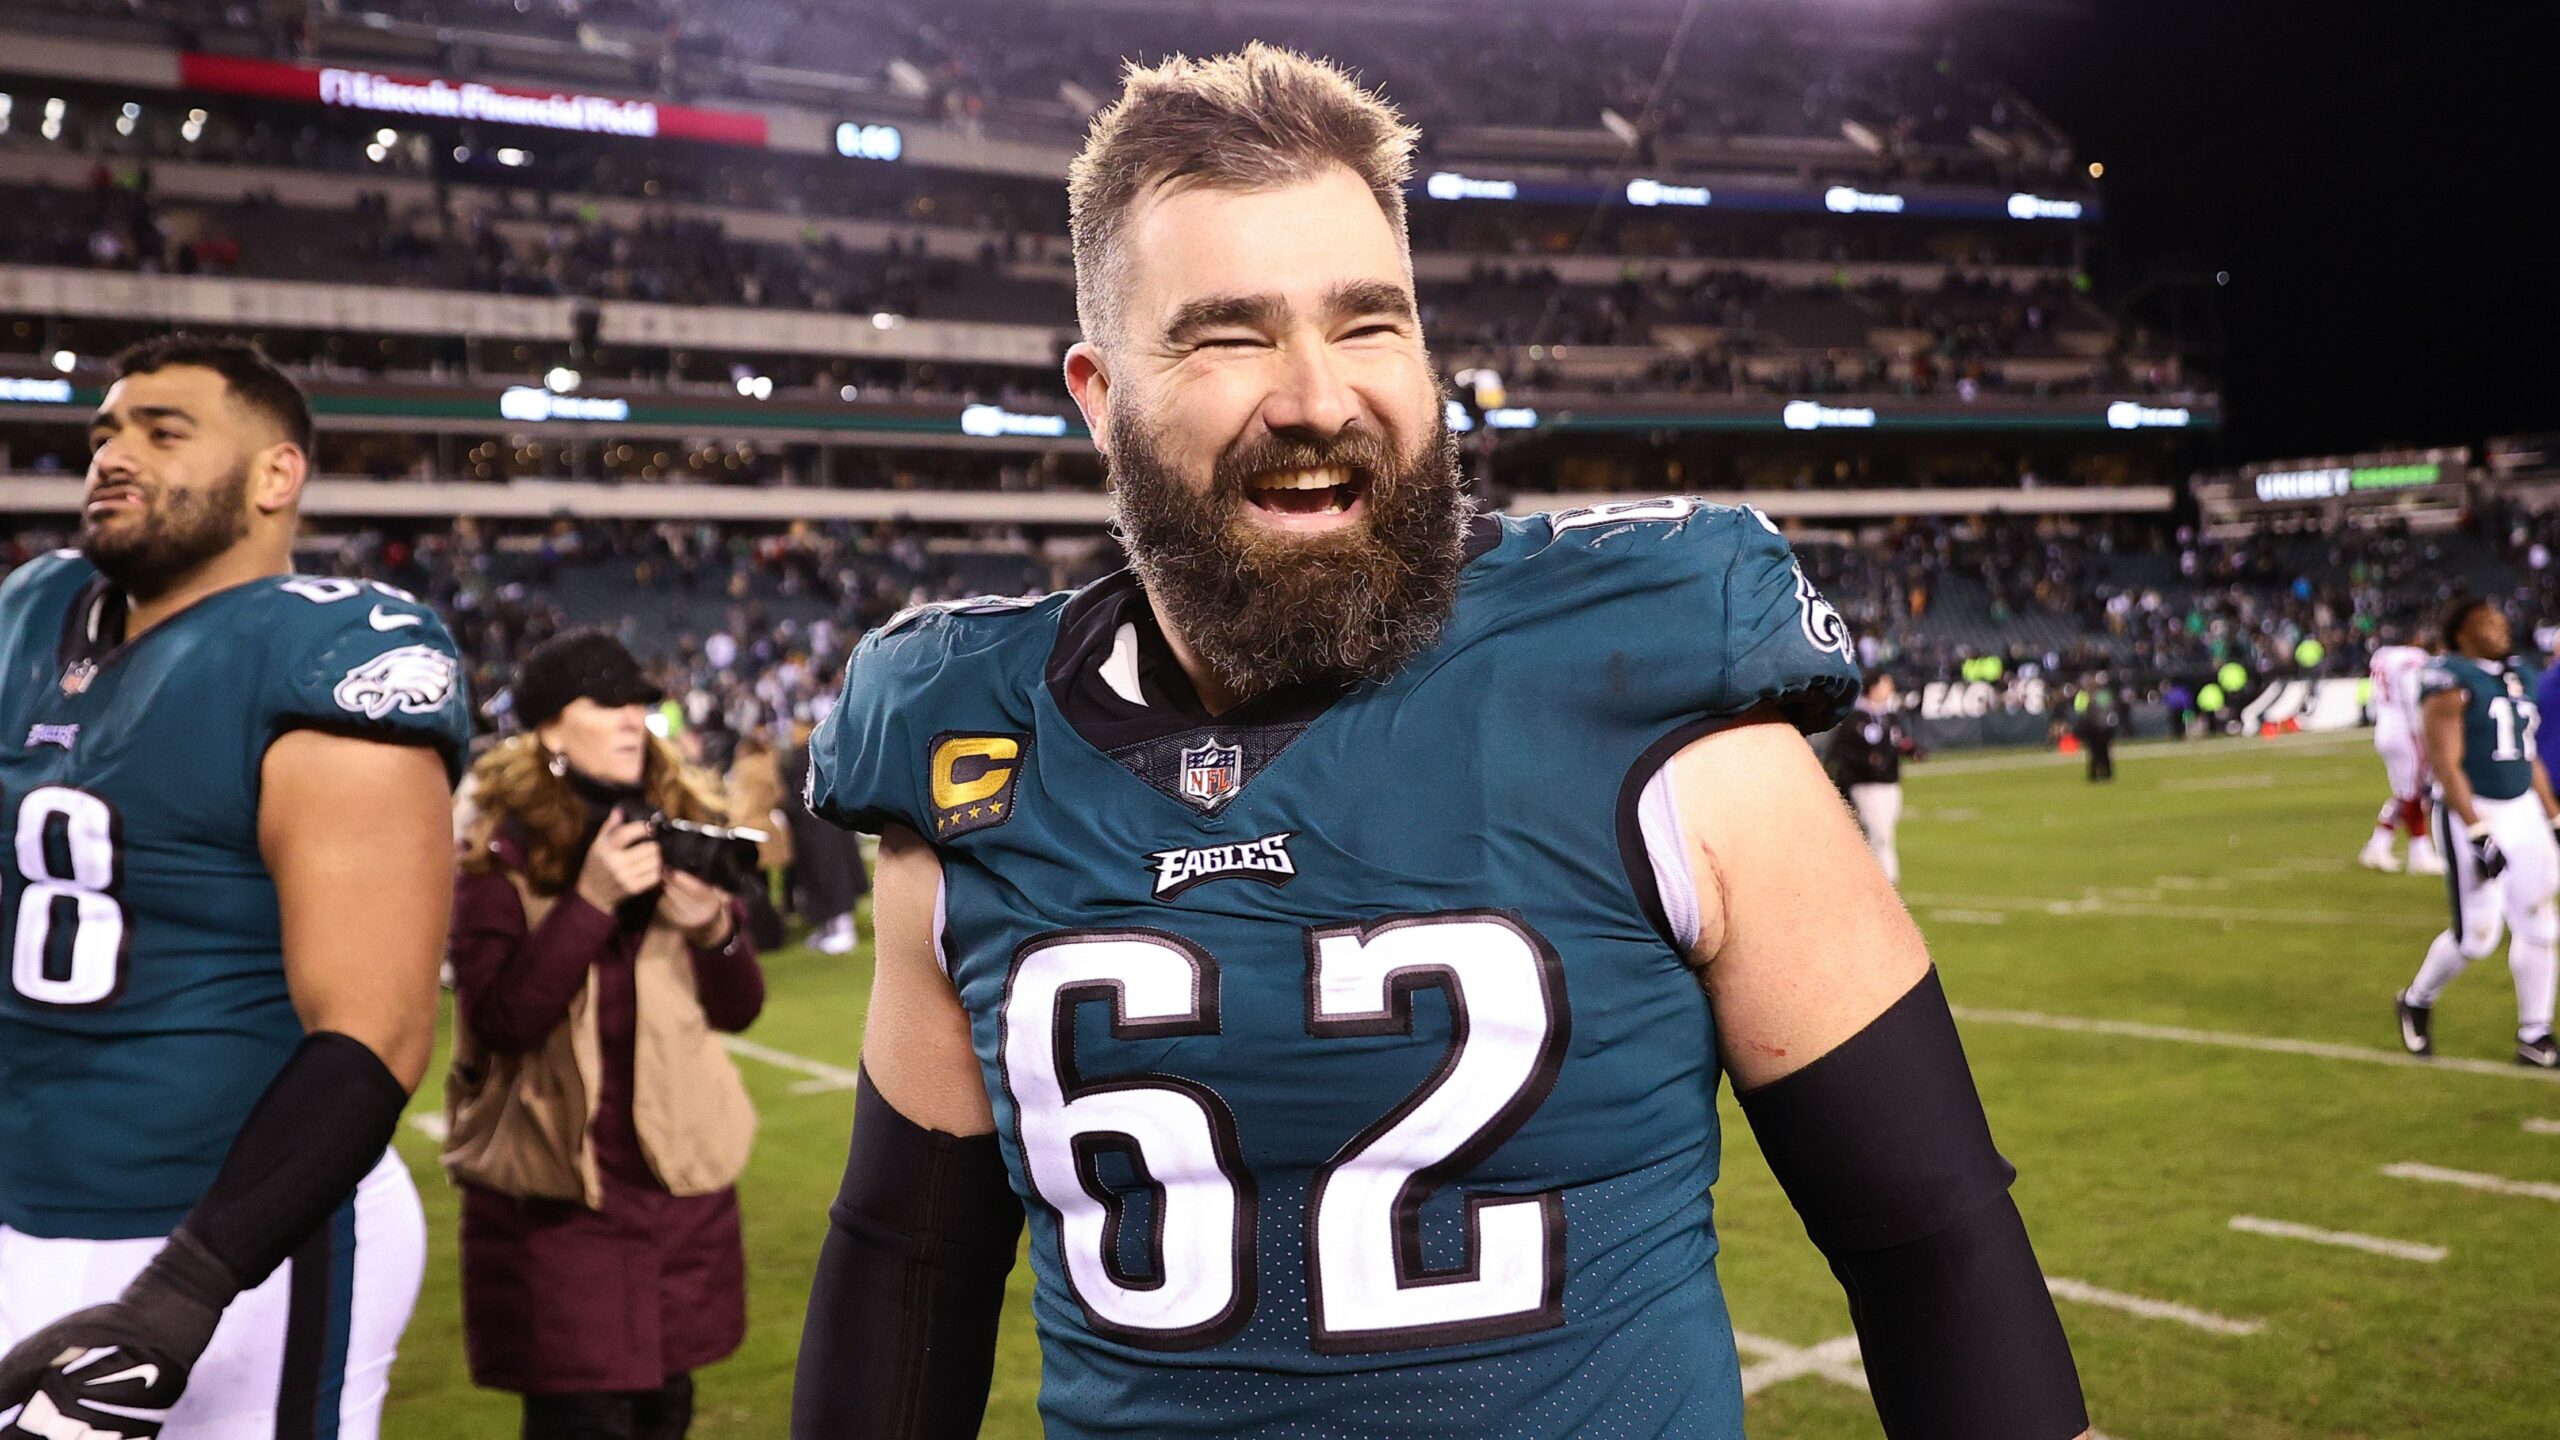 WATCH : The NFL Has Been “Warning Him for Years” About His Costly Move Reveals Eagles Superstar Jason Kelce